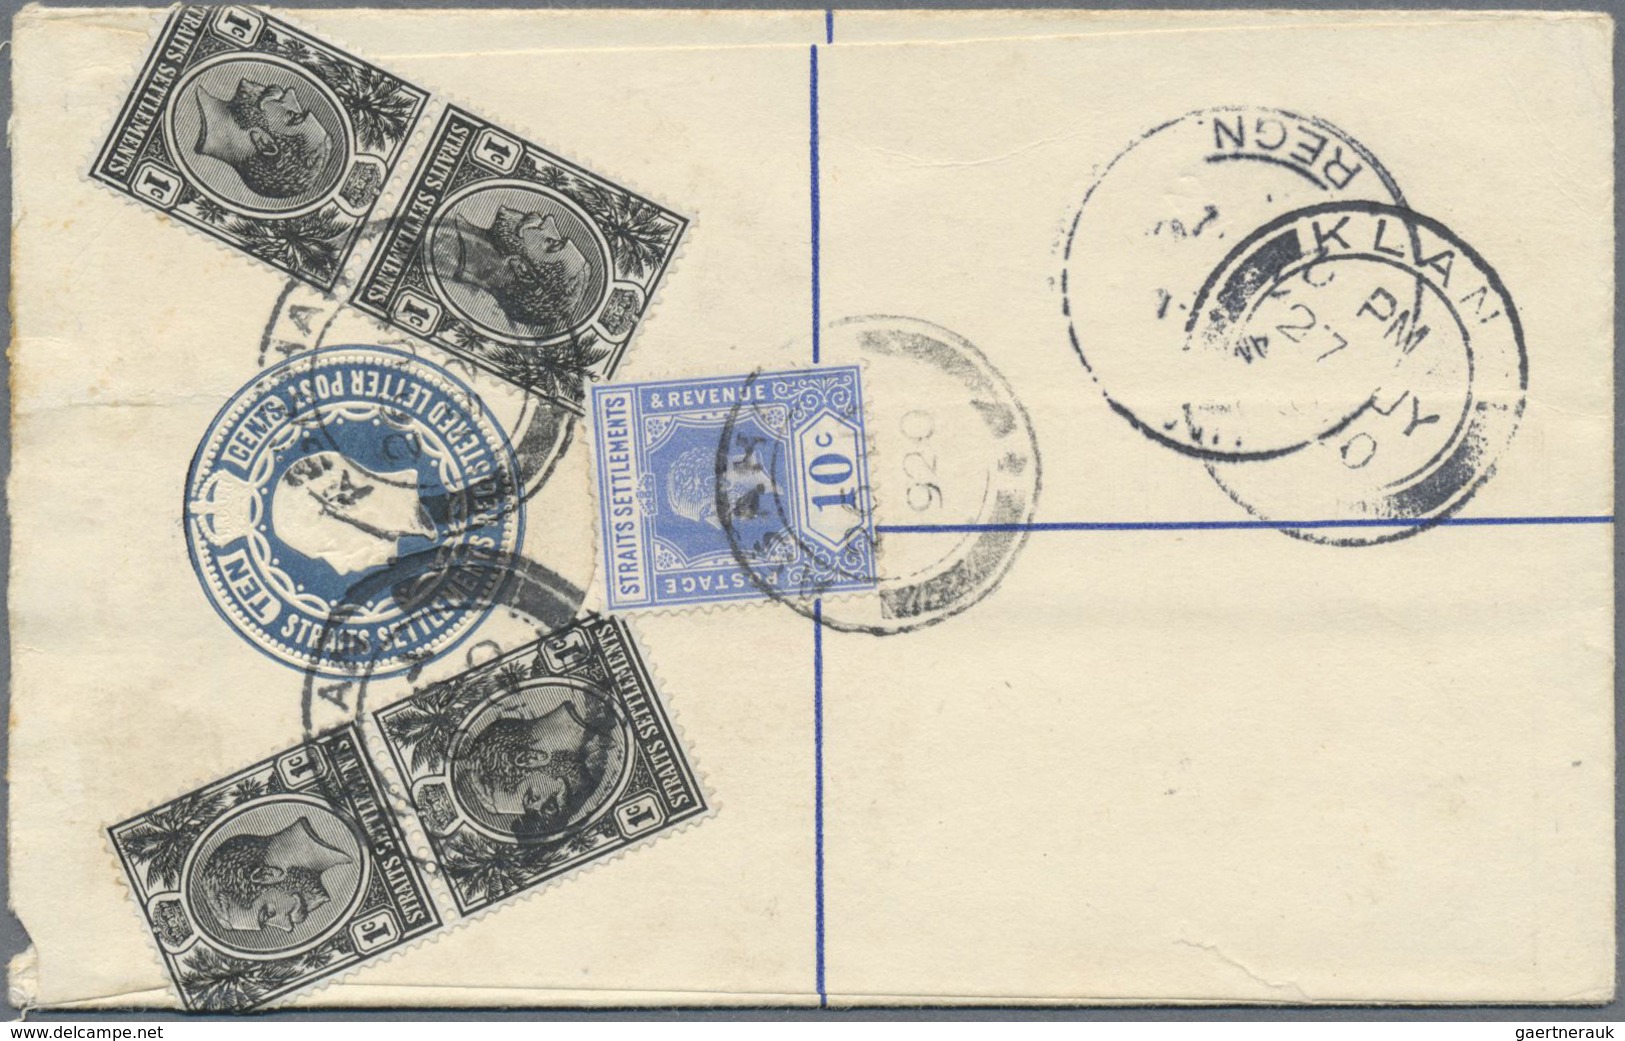 GA Malaiische Staaten - Malakka: 1920, 1c. Black (4, Attached Over Edge) And 10c. Blue Uprating A Regis - Malacca